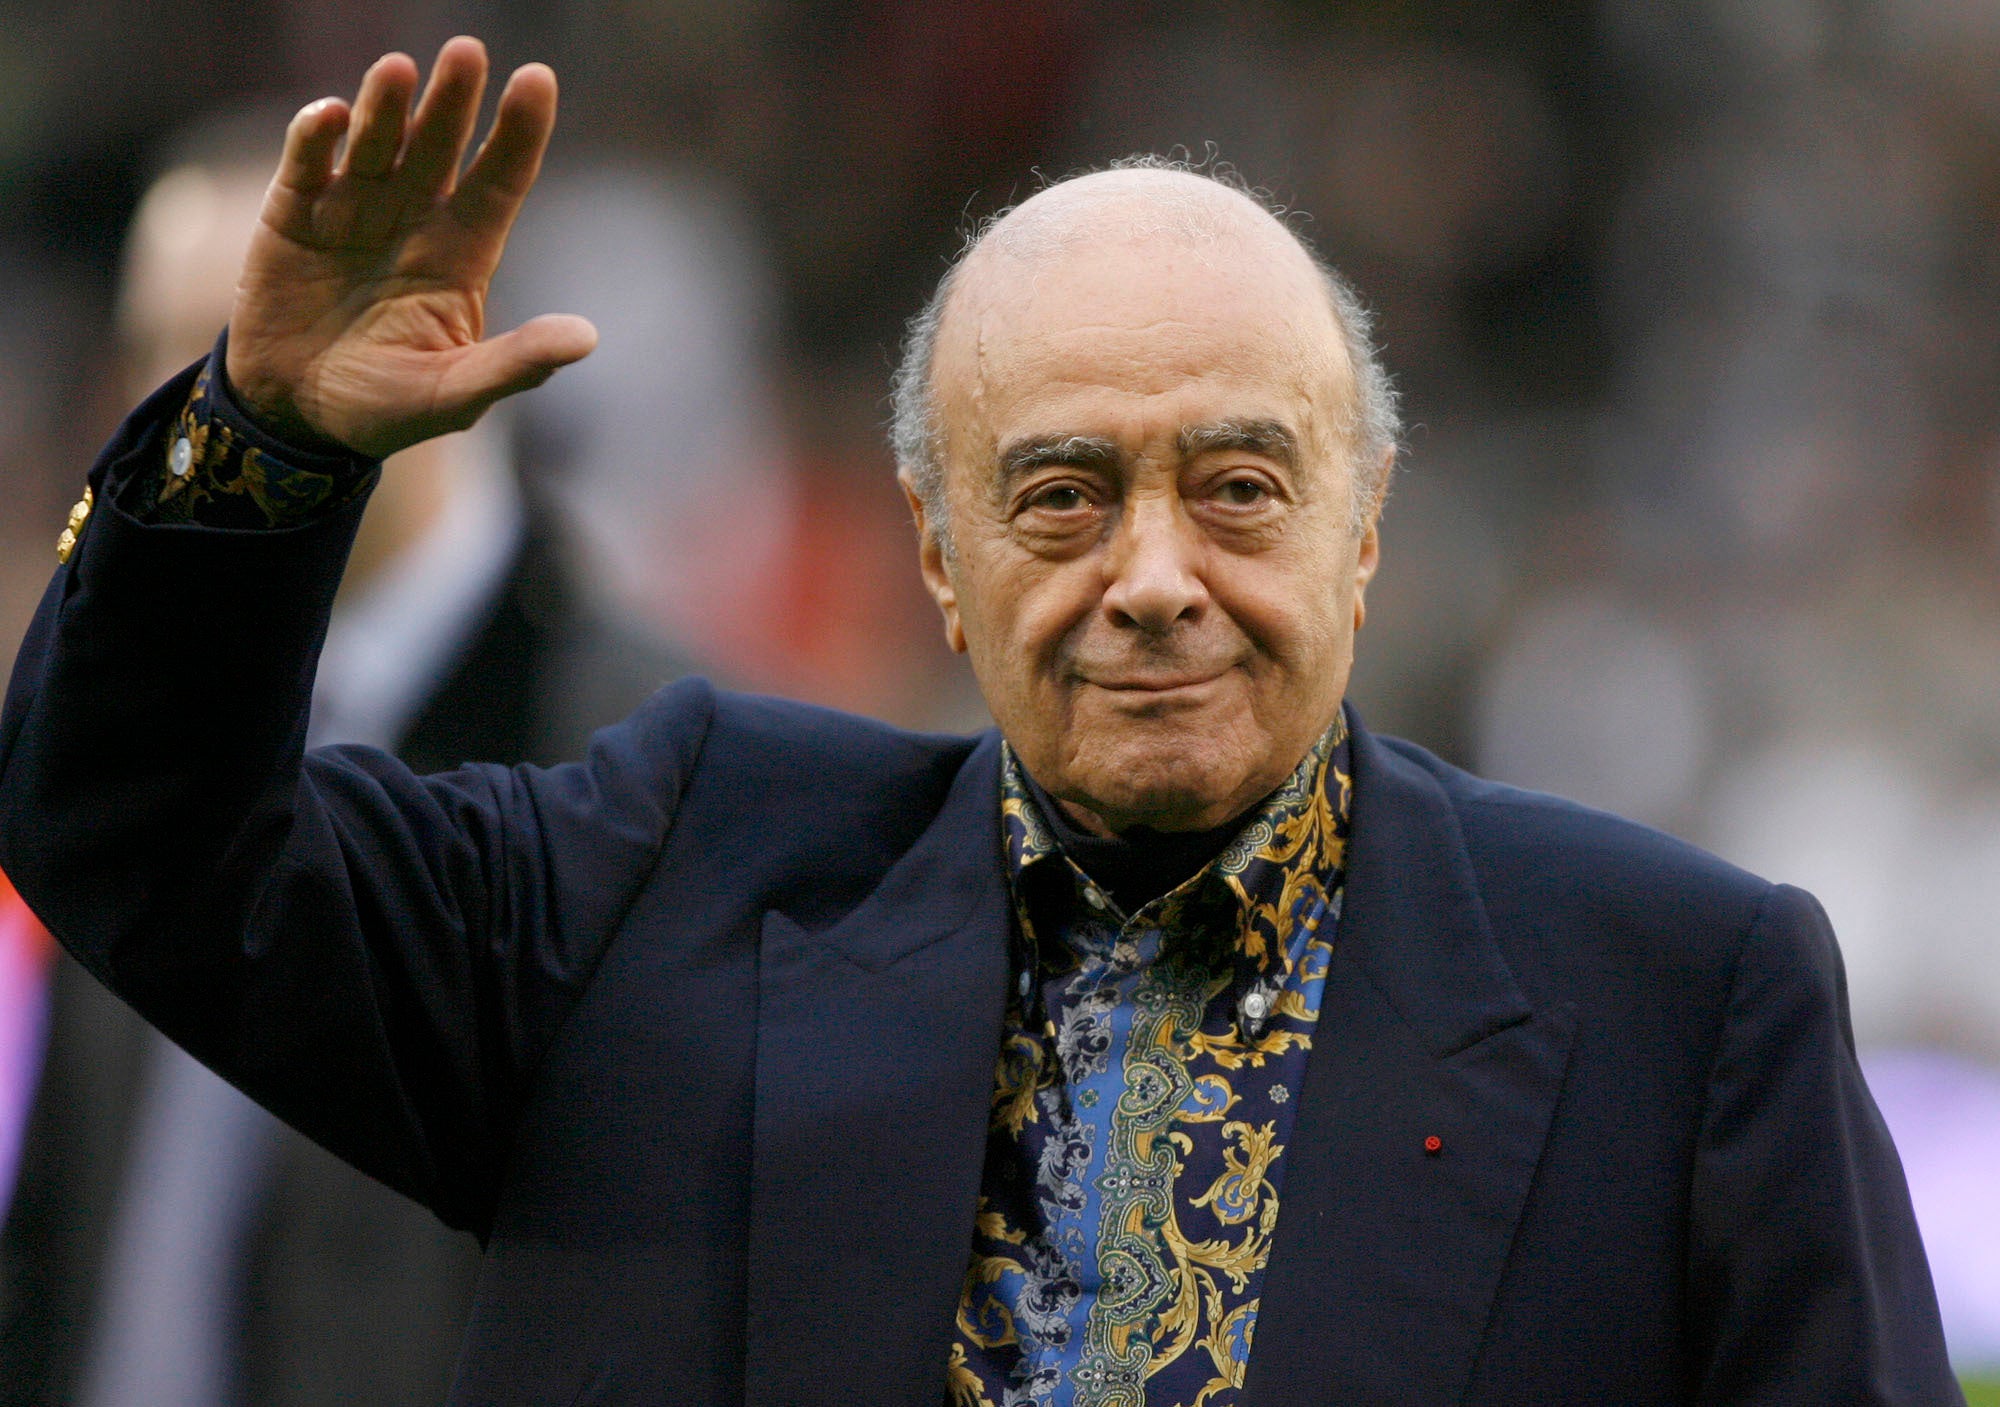 Fulham owner Mohamed Al-Fayed waves to the crowd before the English Premier League soccer match against Tottenham in 2015